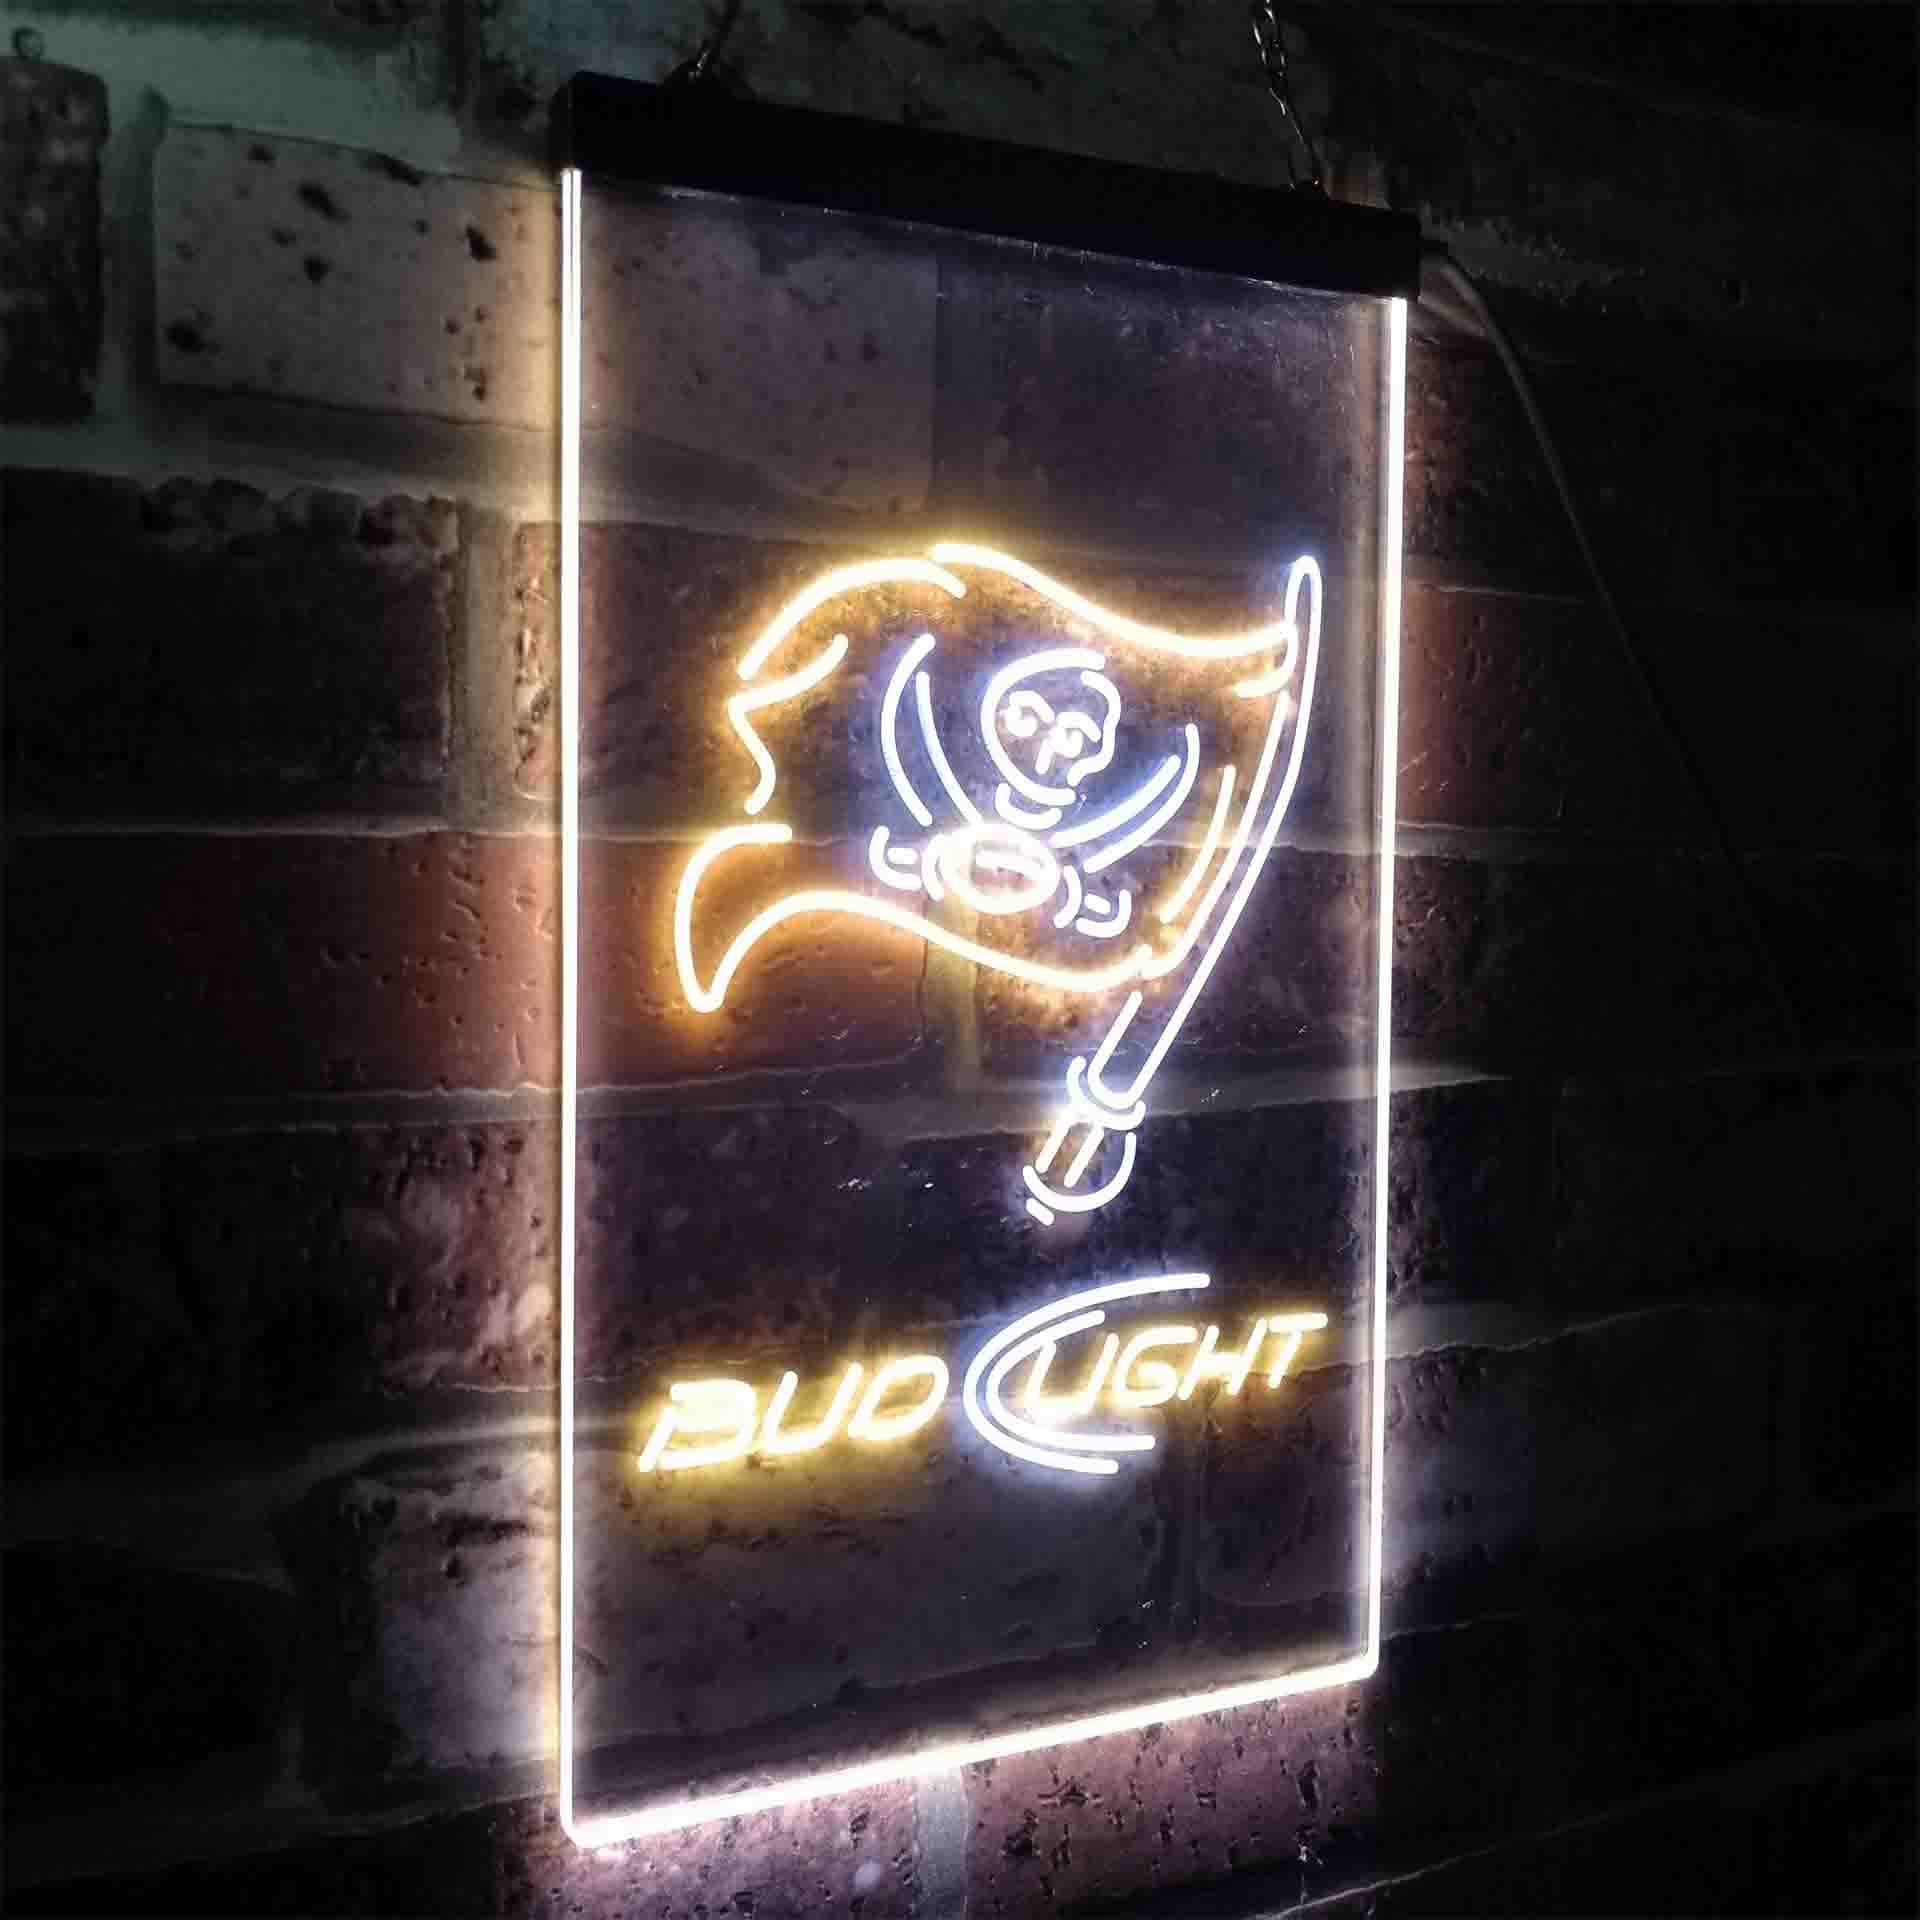 Tampa Bay Buccaneers Bud Light LED Neon Sign